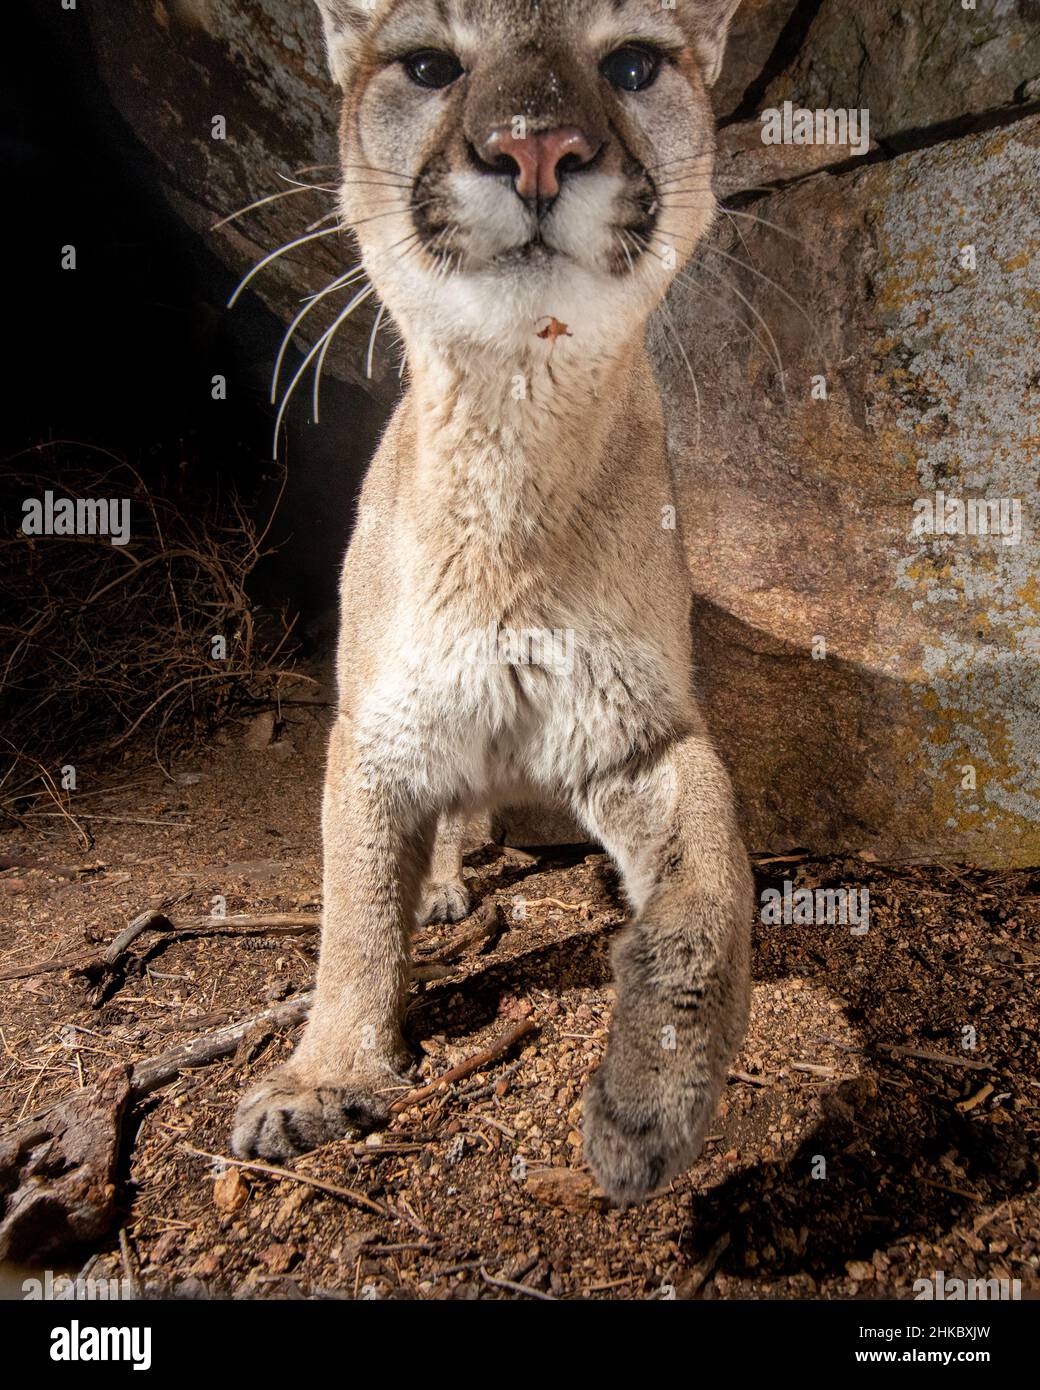 Young Colorado Mountain Lion captured with DSLR camera trap staring at camera. Stock Photo